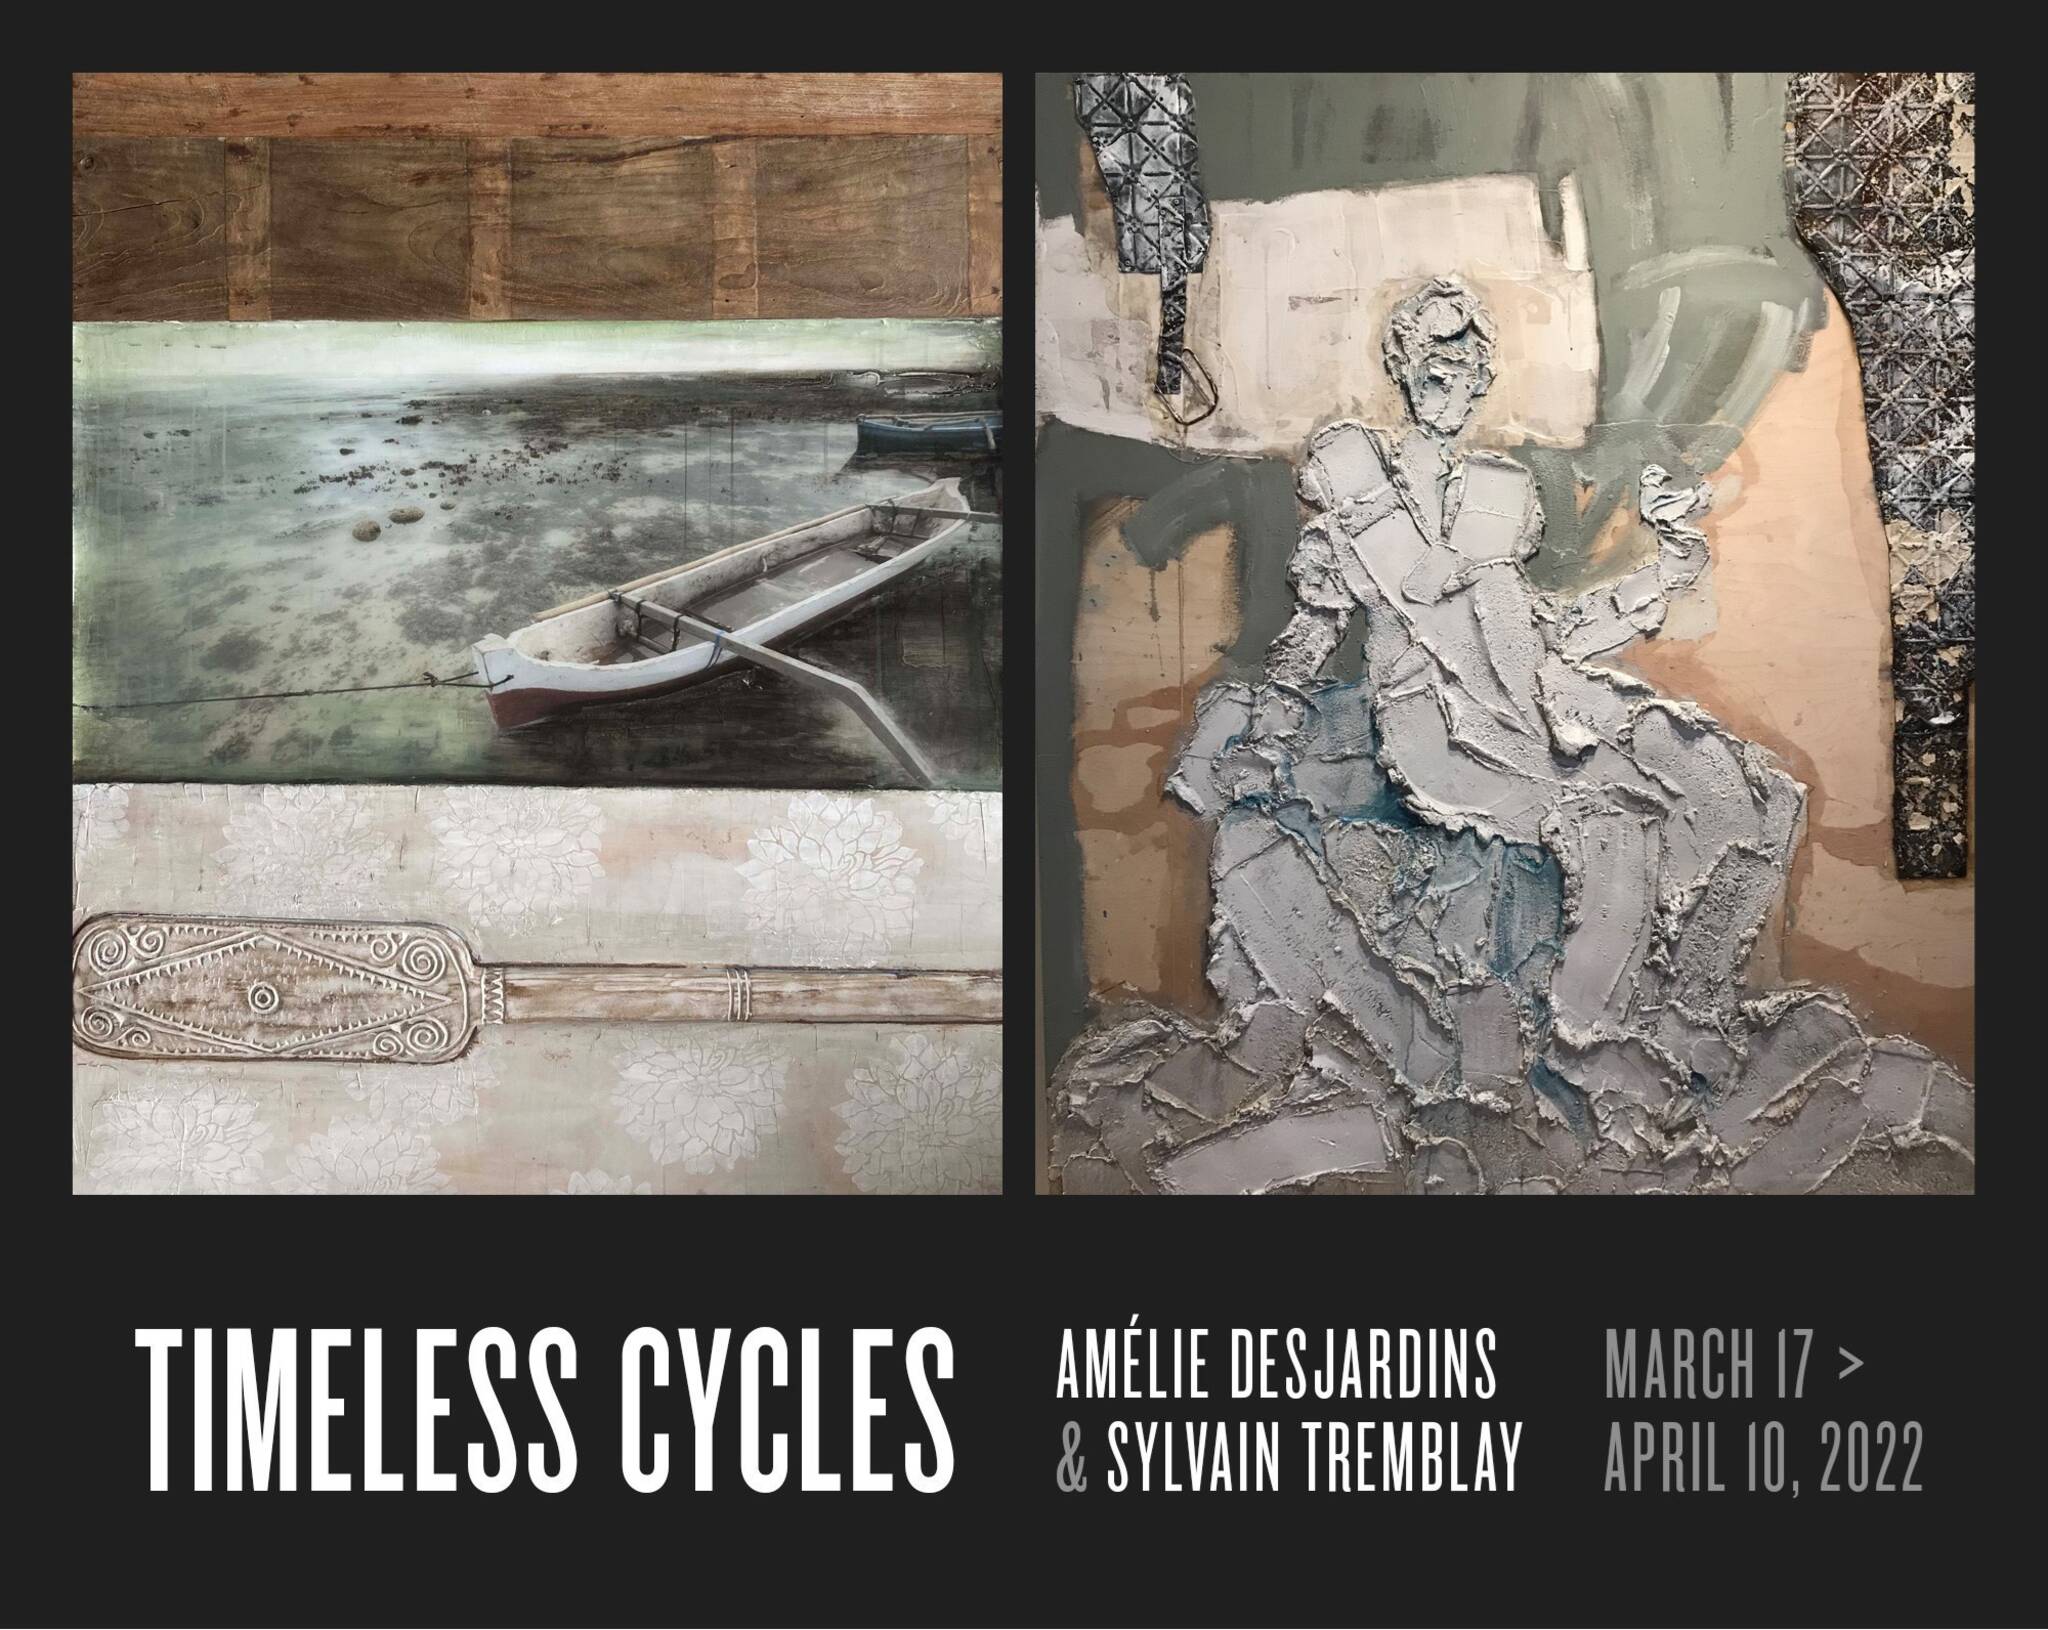 TIMELESS CYCLES